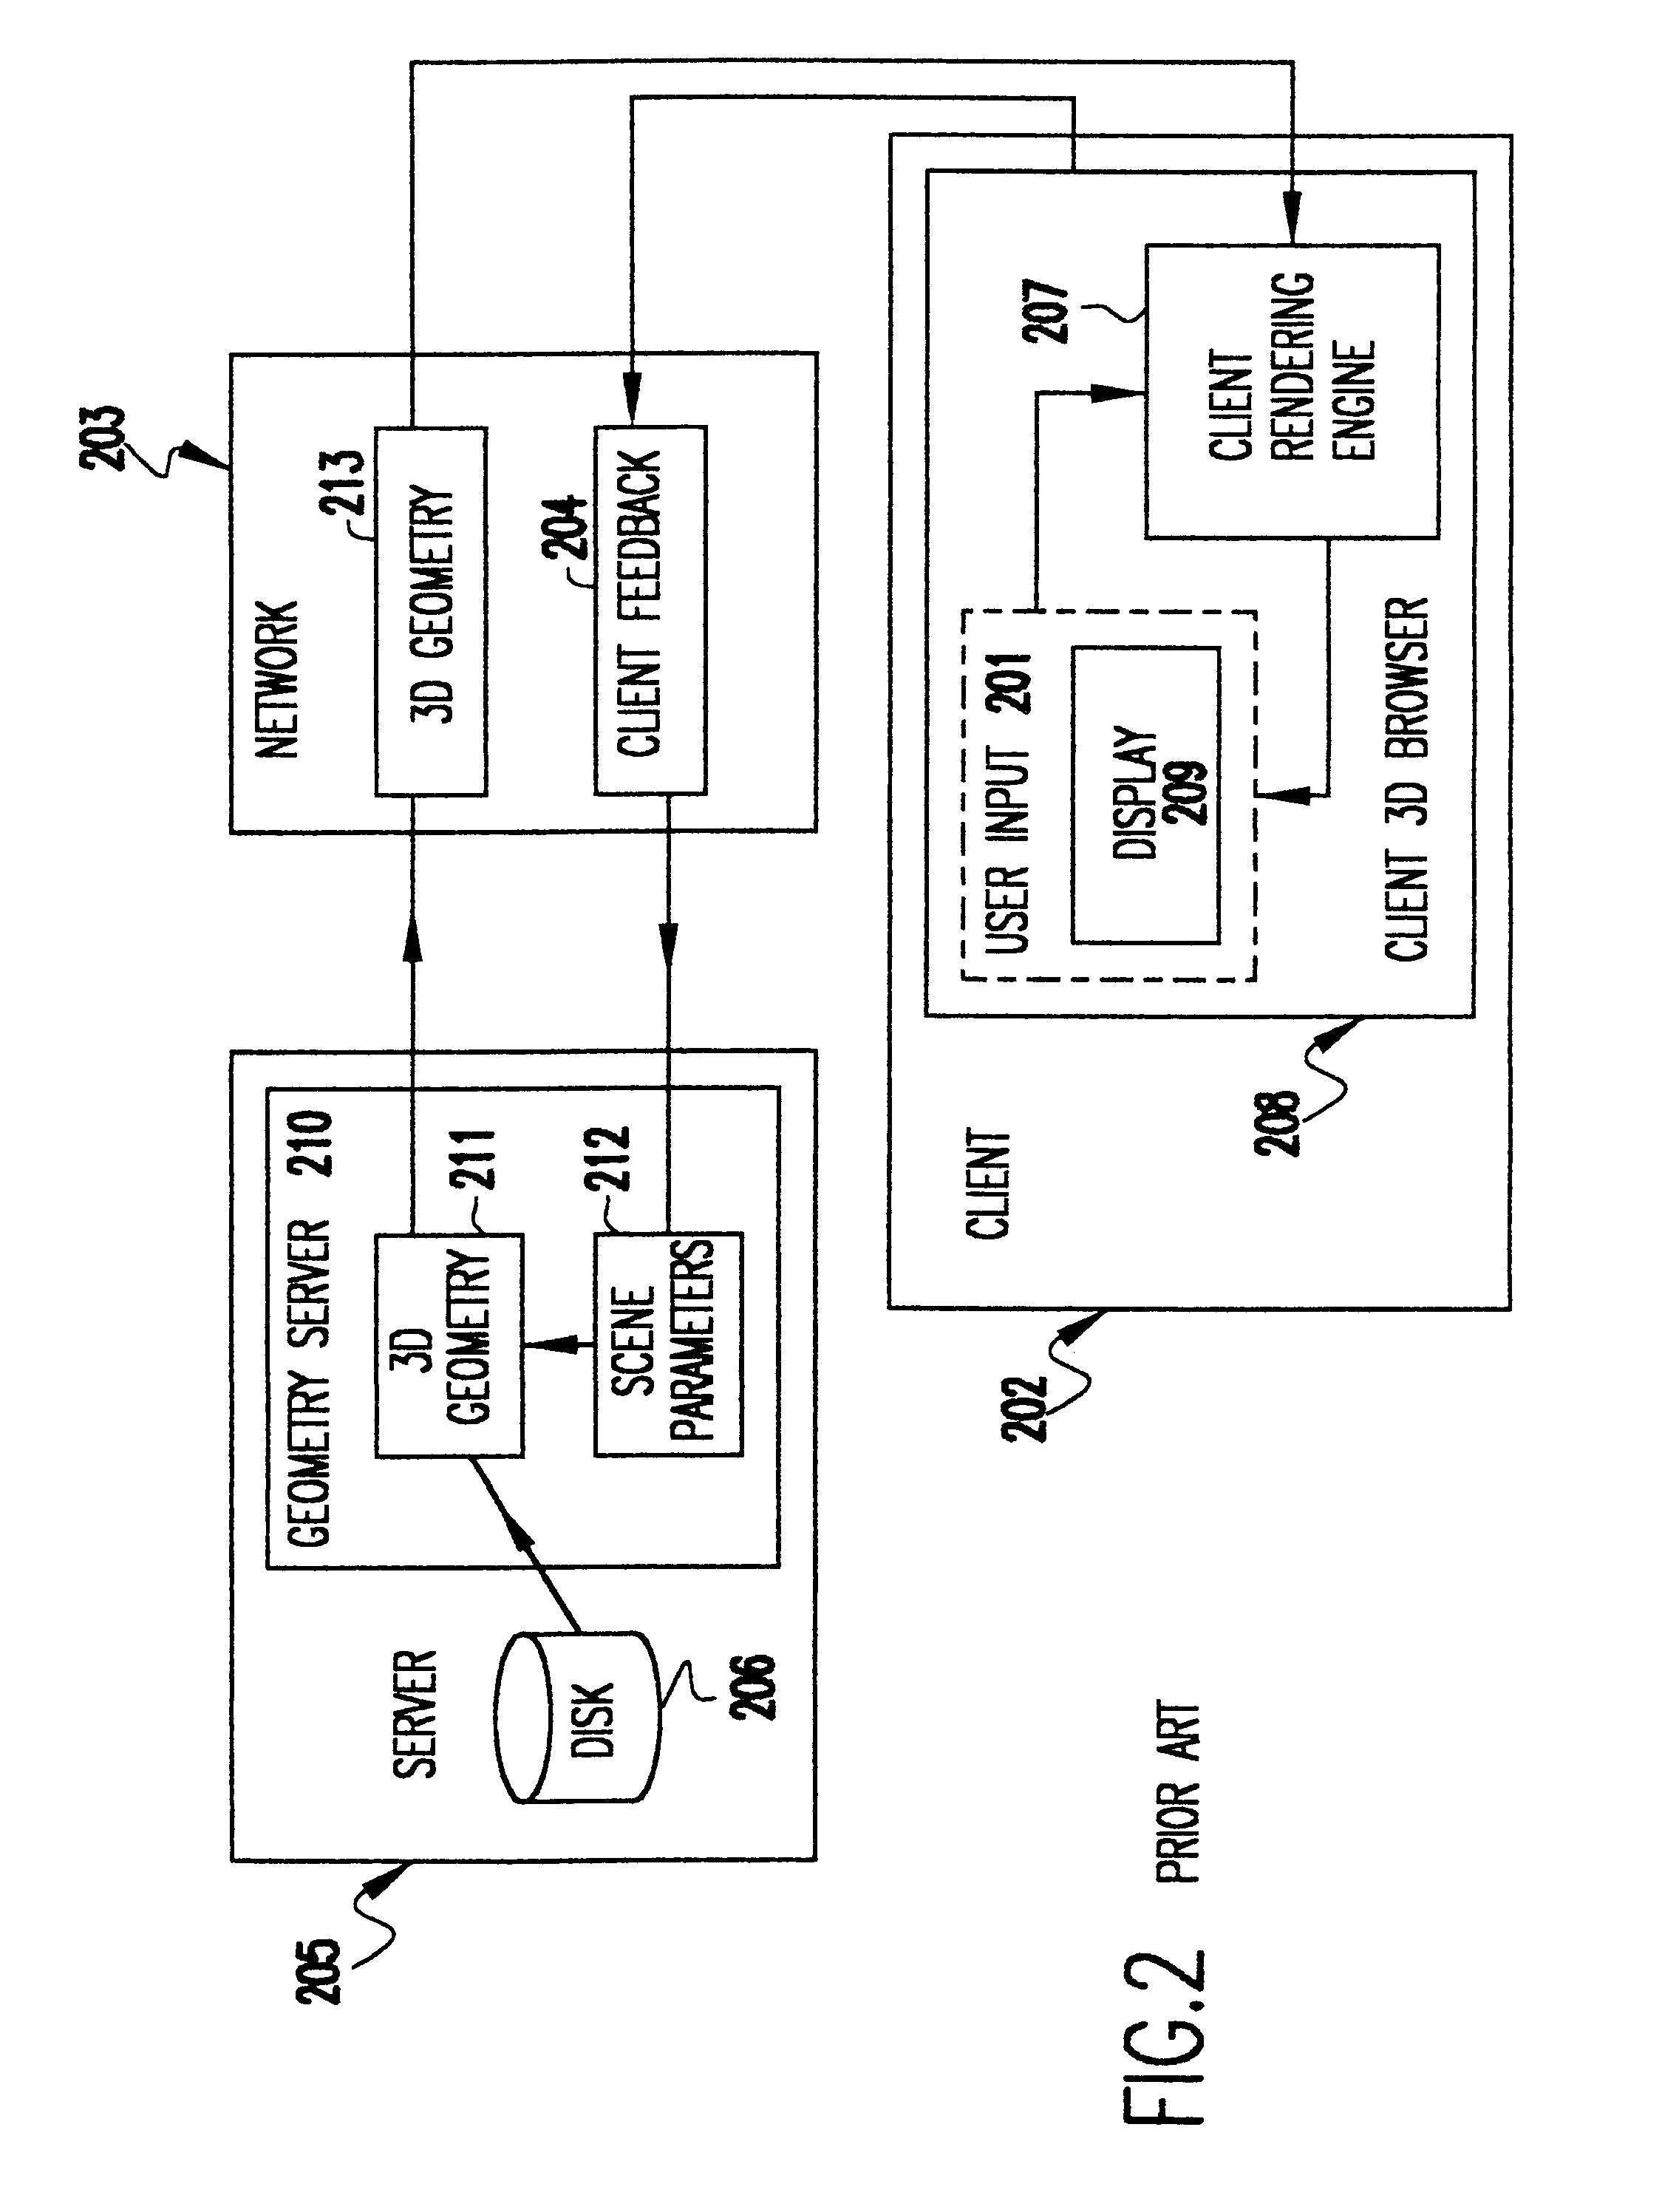 Methods and apparatus for delivering 3D graphics in a networked environment